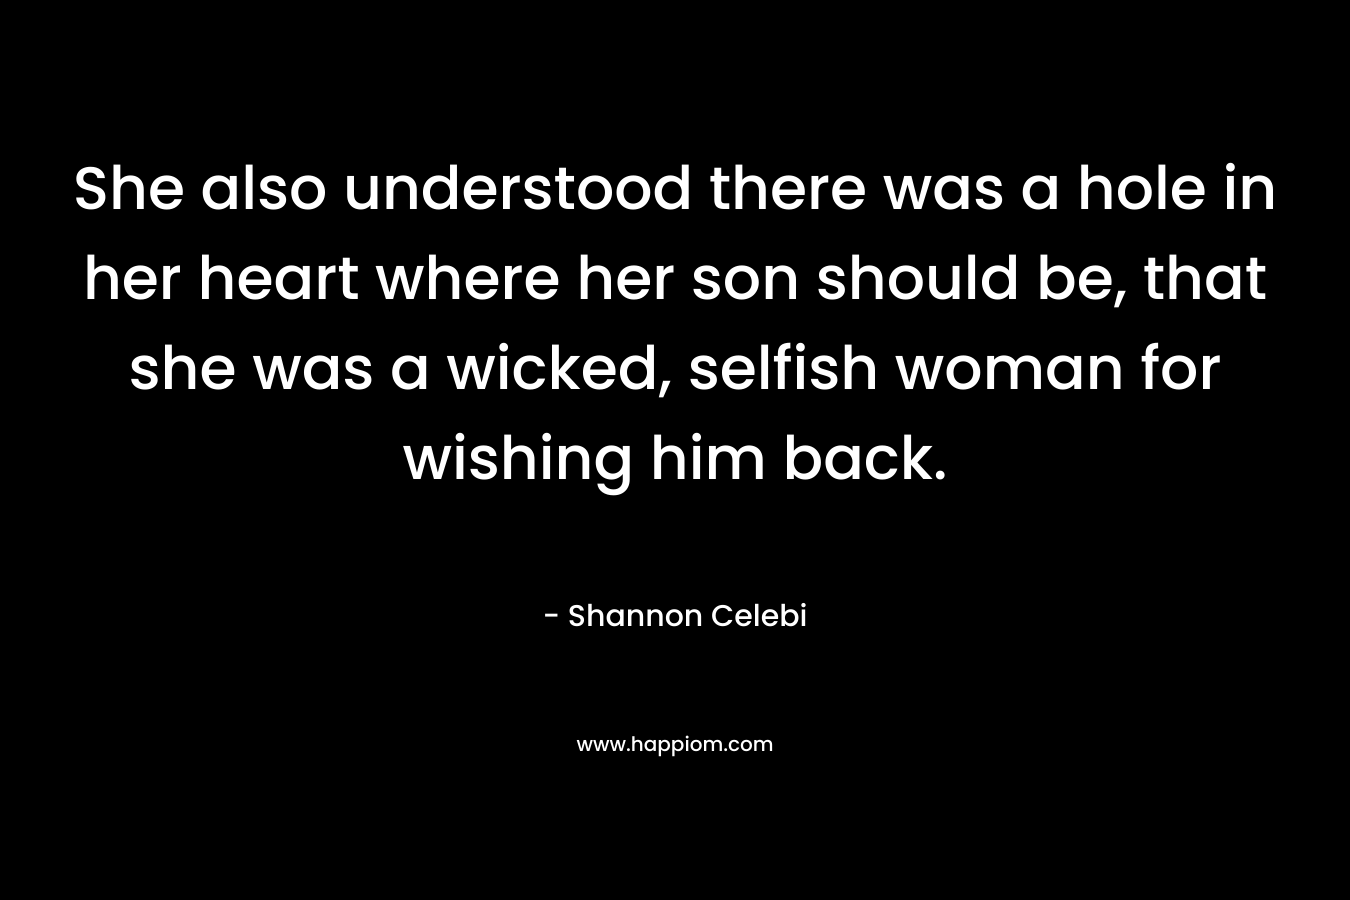 She also understood there was a hole in her heart where her son should be, that she was a wicked, selfish woman for wishing him back.